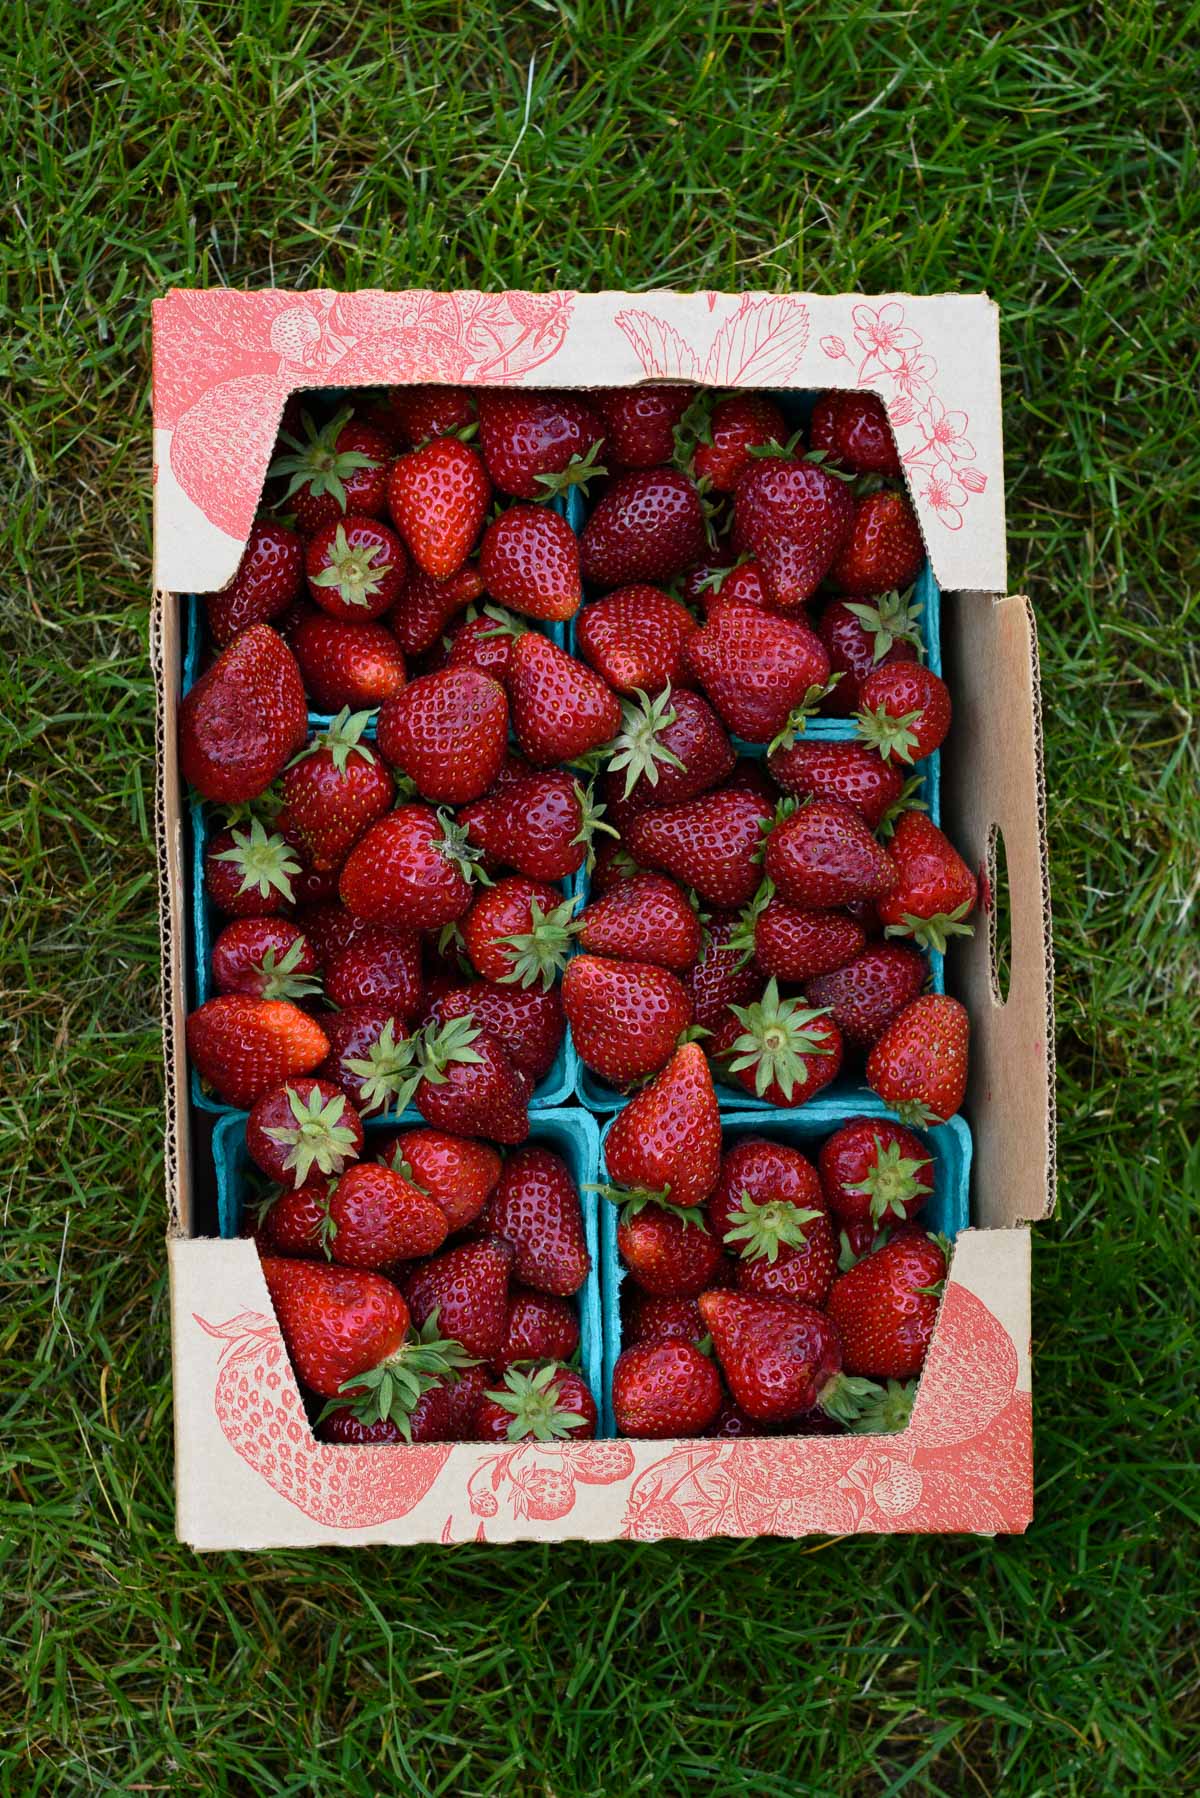 A box of fresh strawberries from the farmers market sitting on grass.